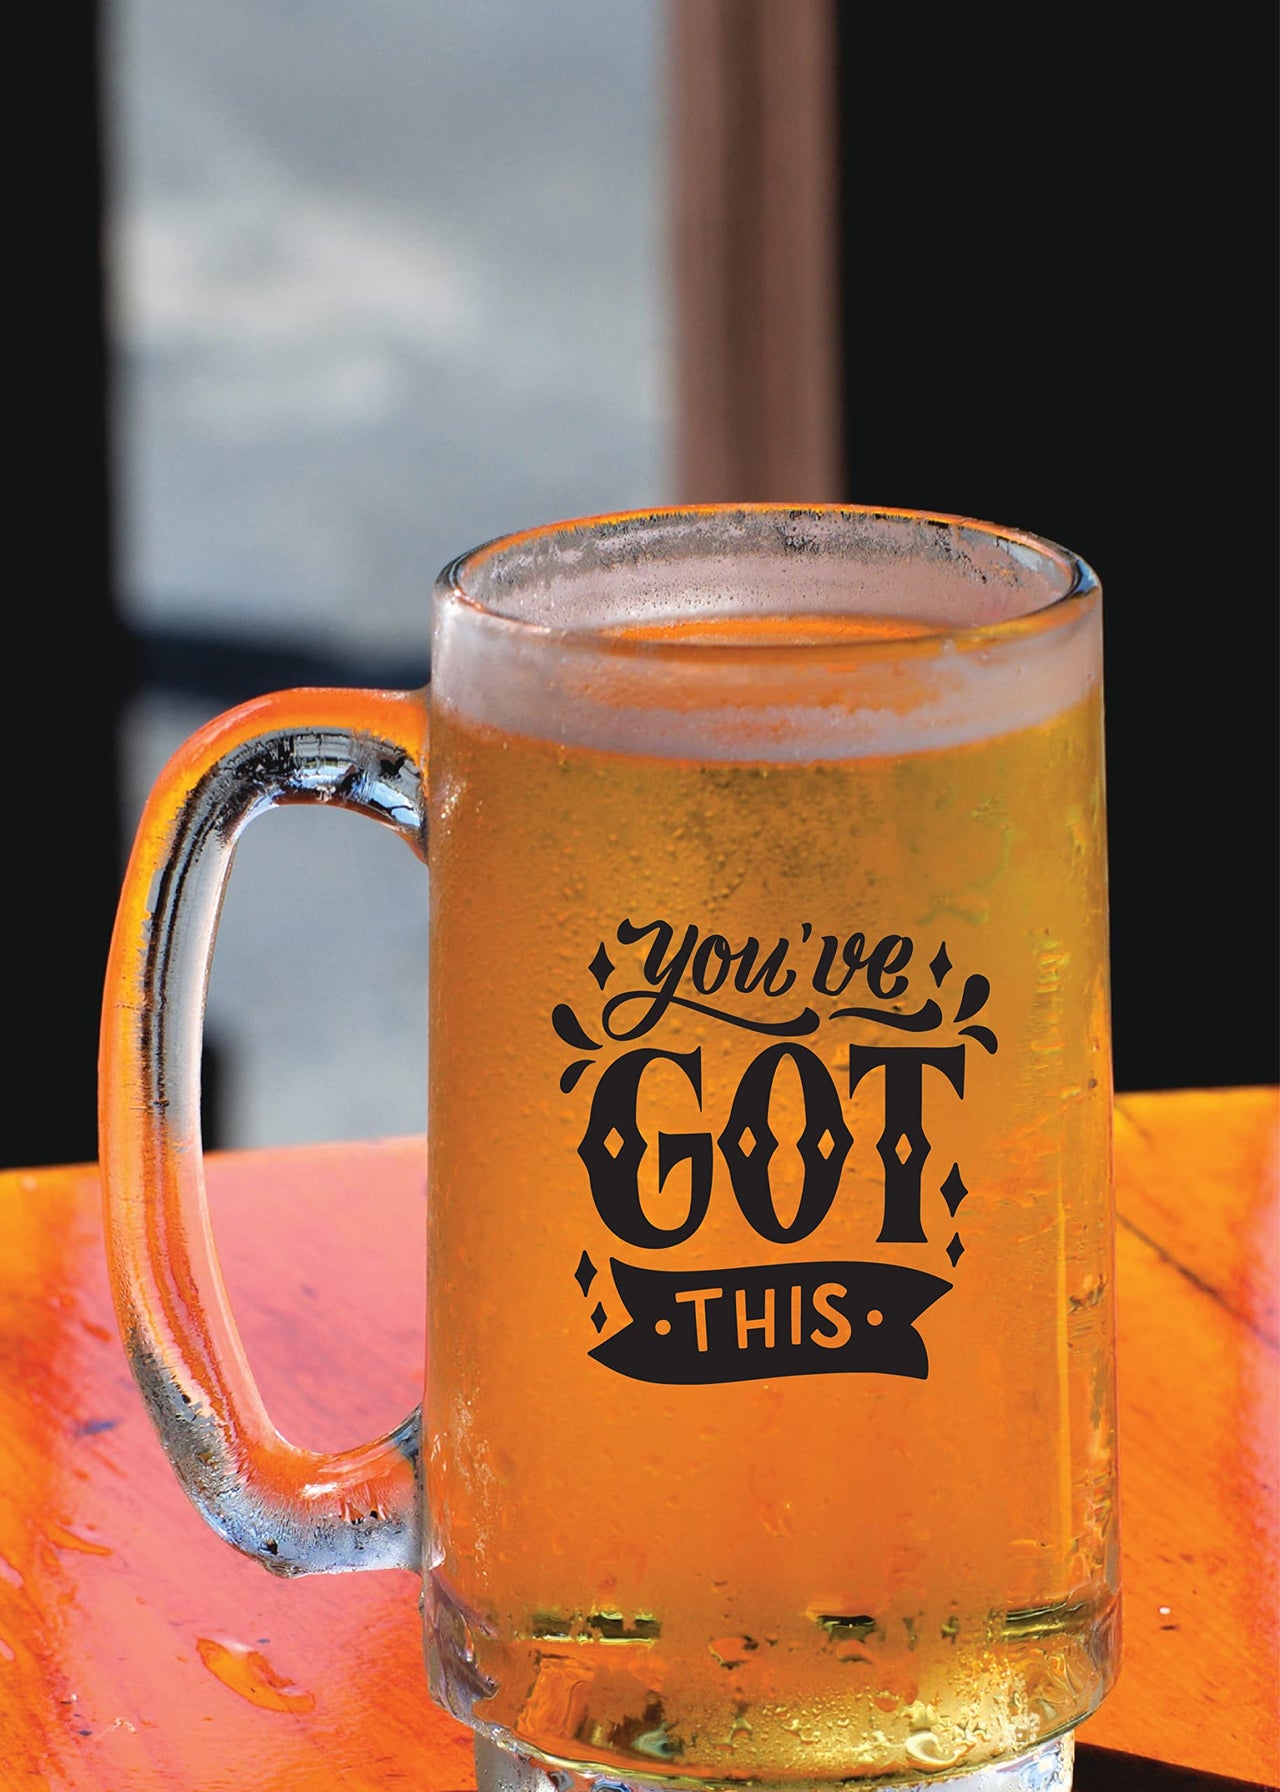 You've Got This - Beer Mug -1 Piece Clear 500 ml - Transparent Glass Printed Beer Mug with Handle Gift for Men